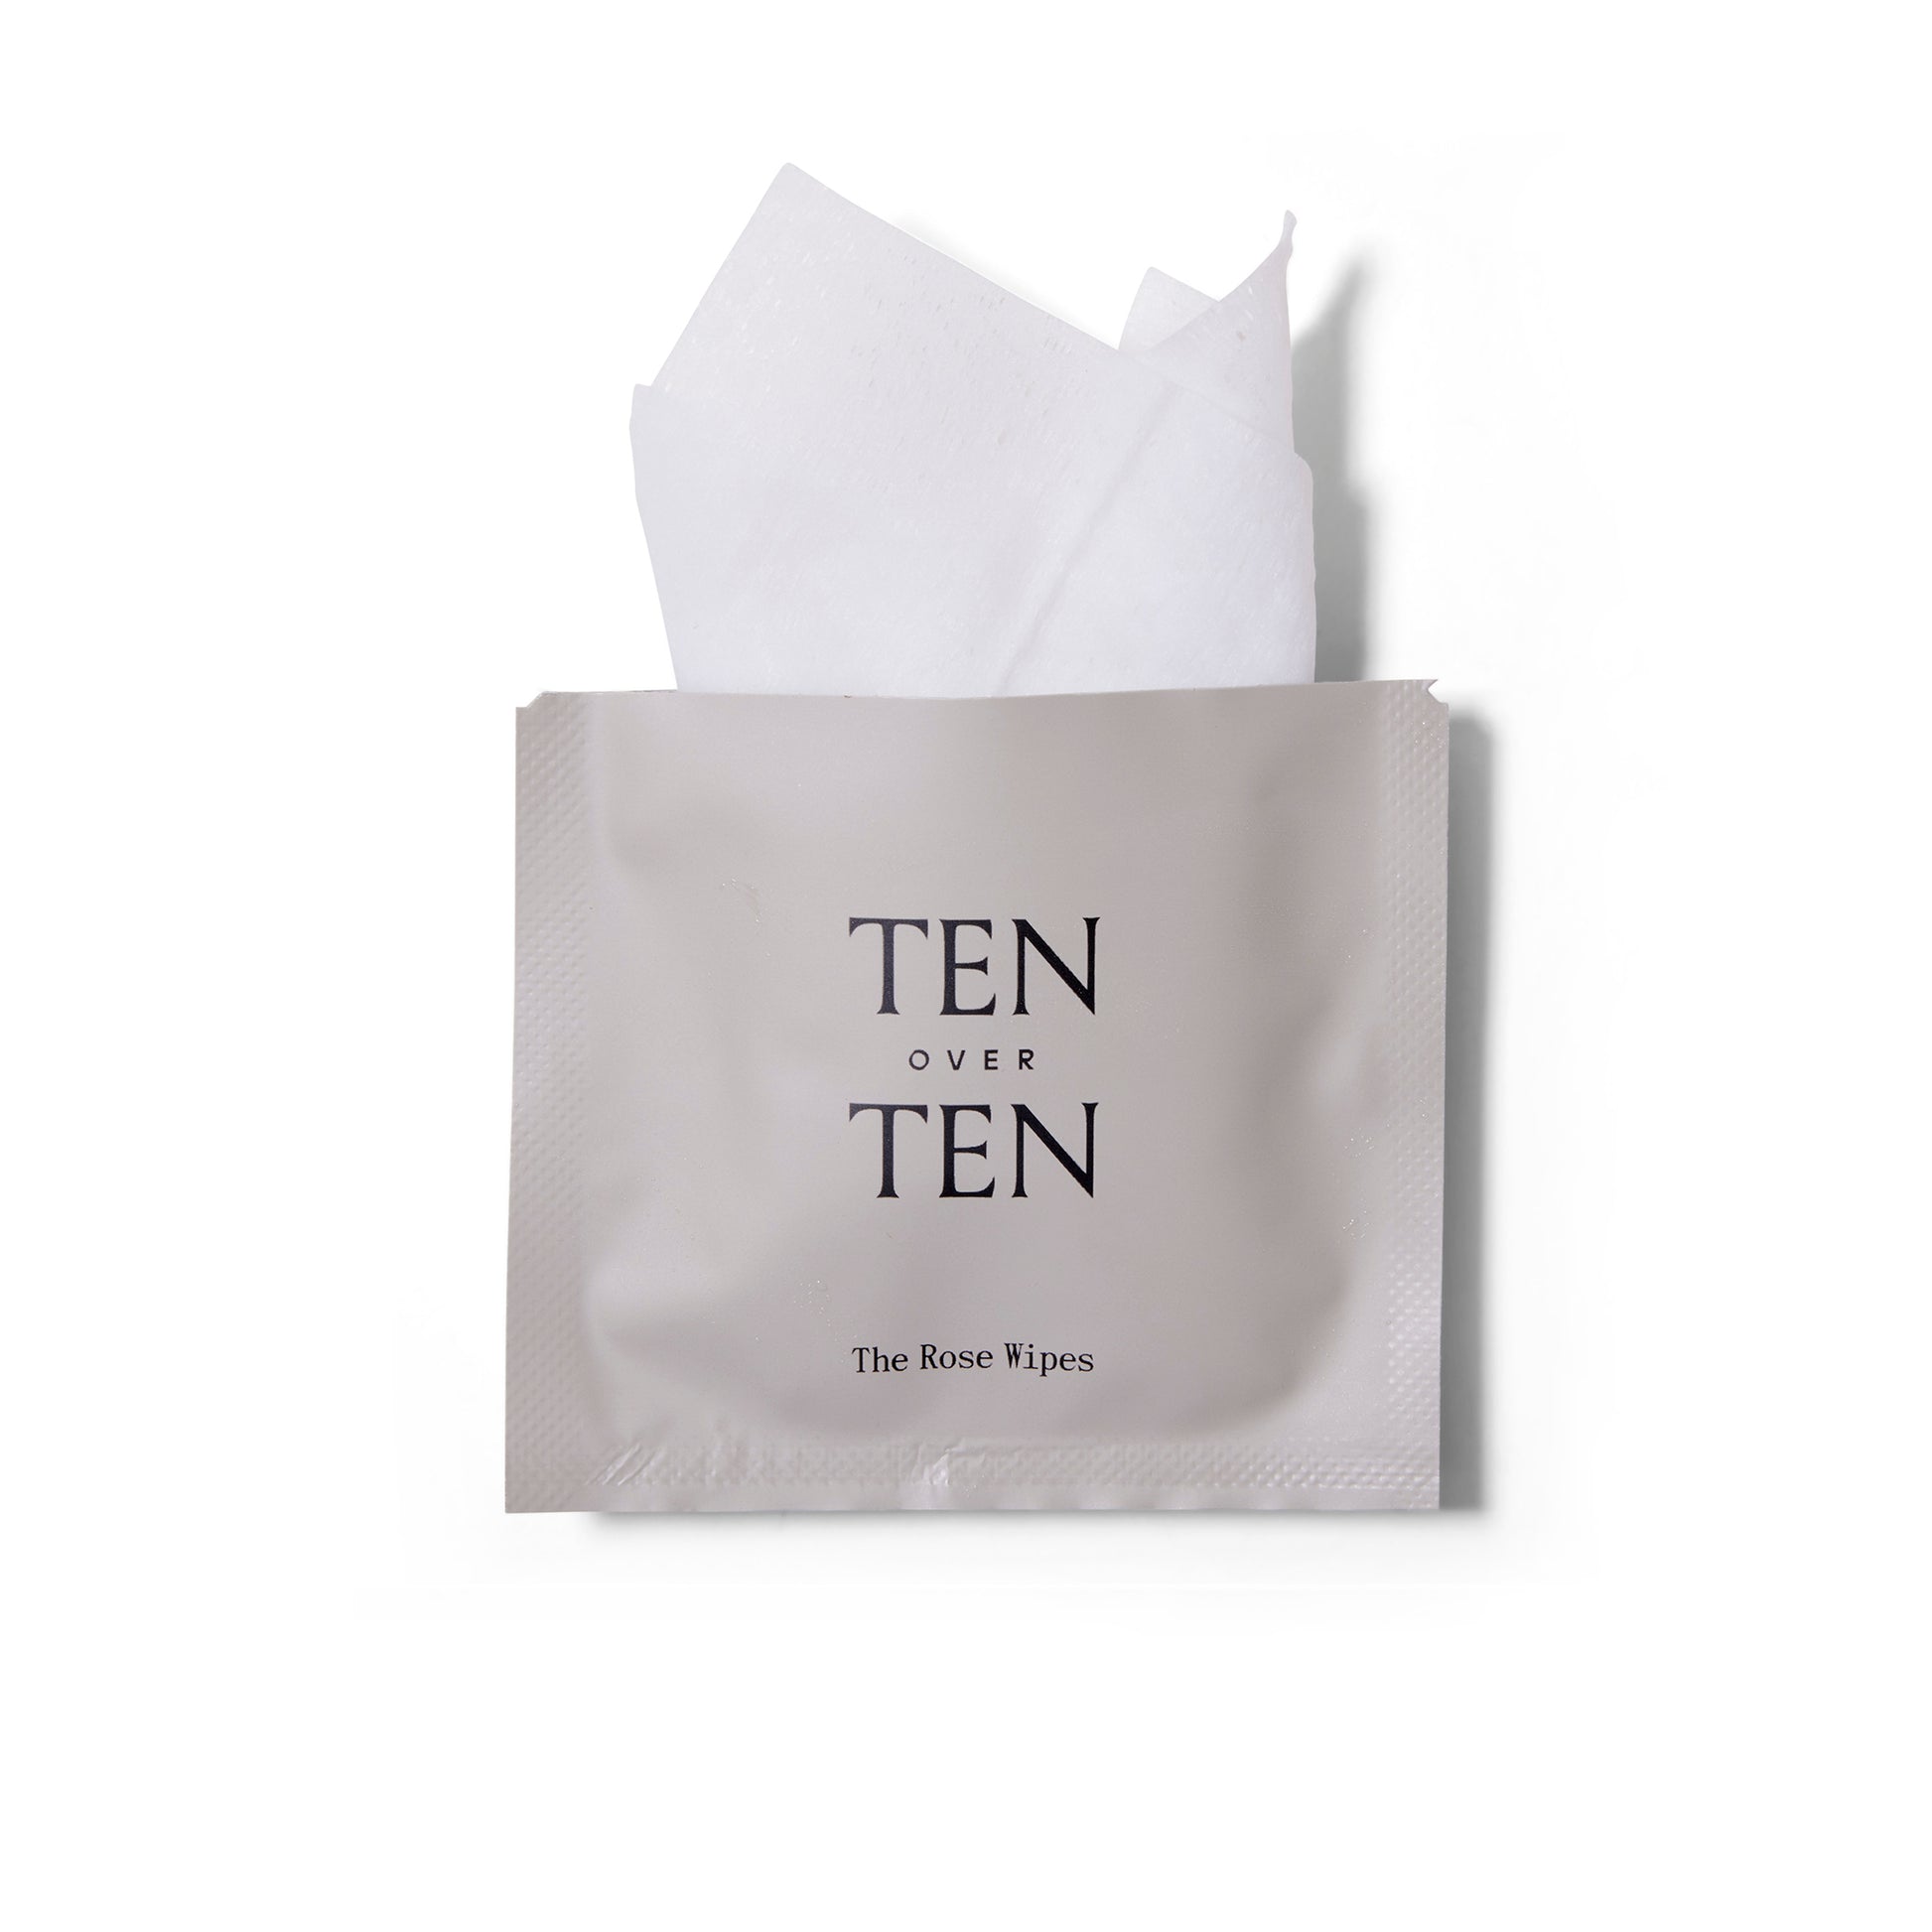 an open sachet of The Rose Wipes nail polish remover from ten over ten. The towelette is poking out of the opening.